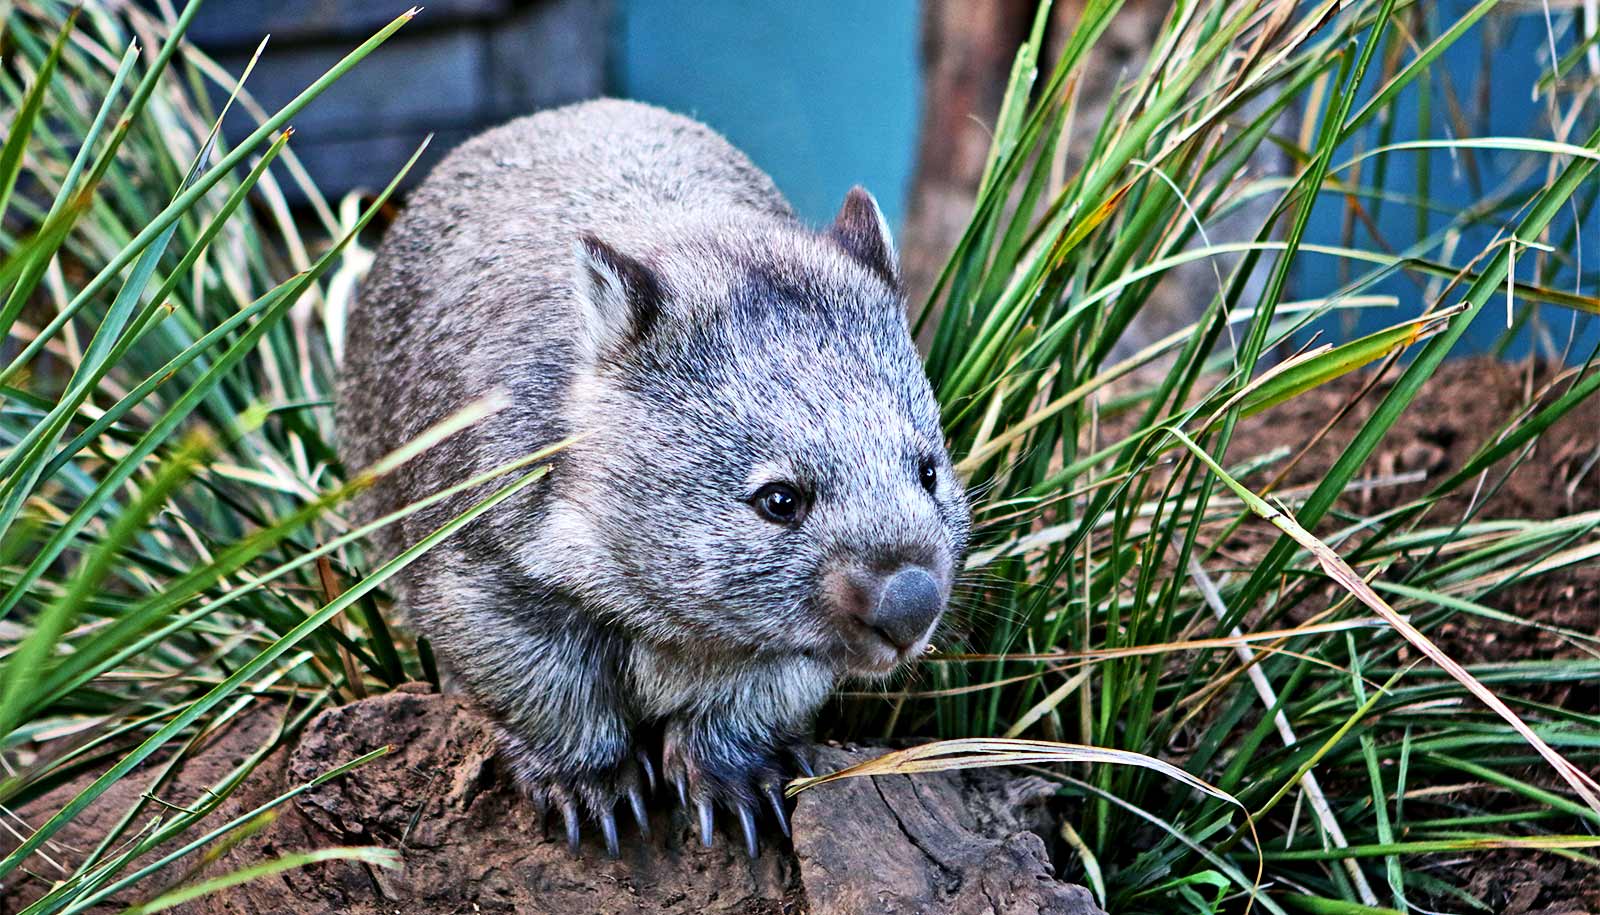 Wombat Skulls Are Changing In Response To Food Futurity